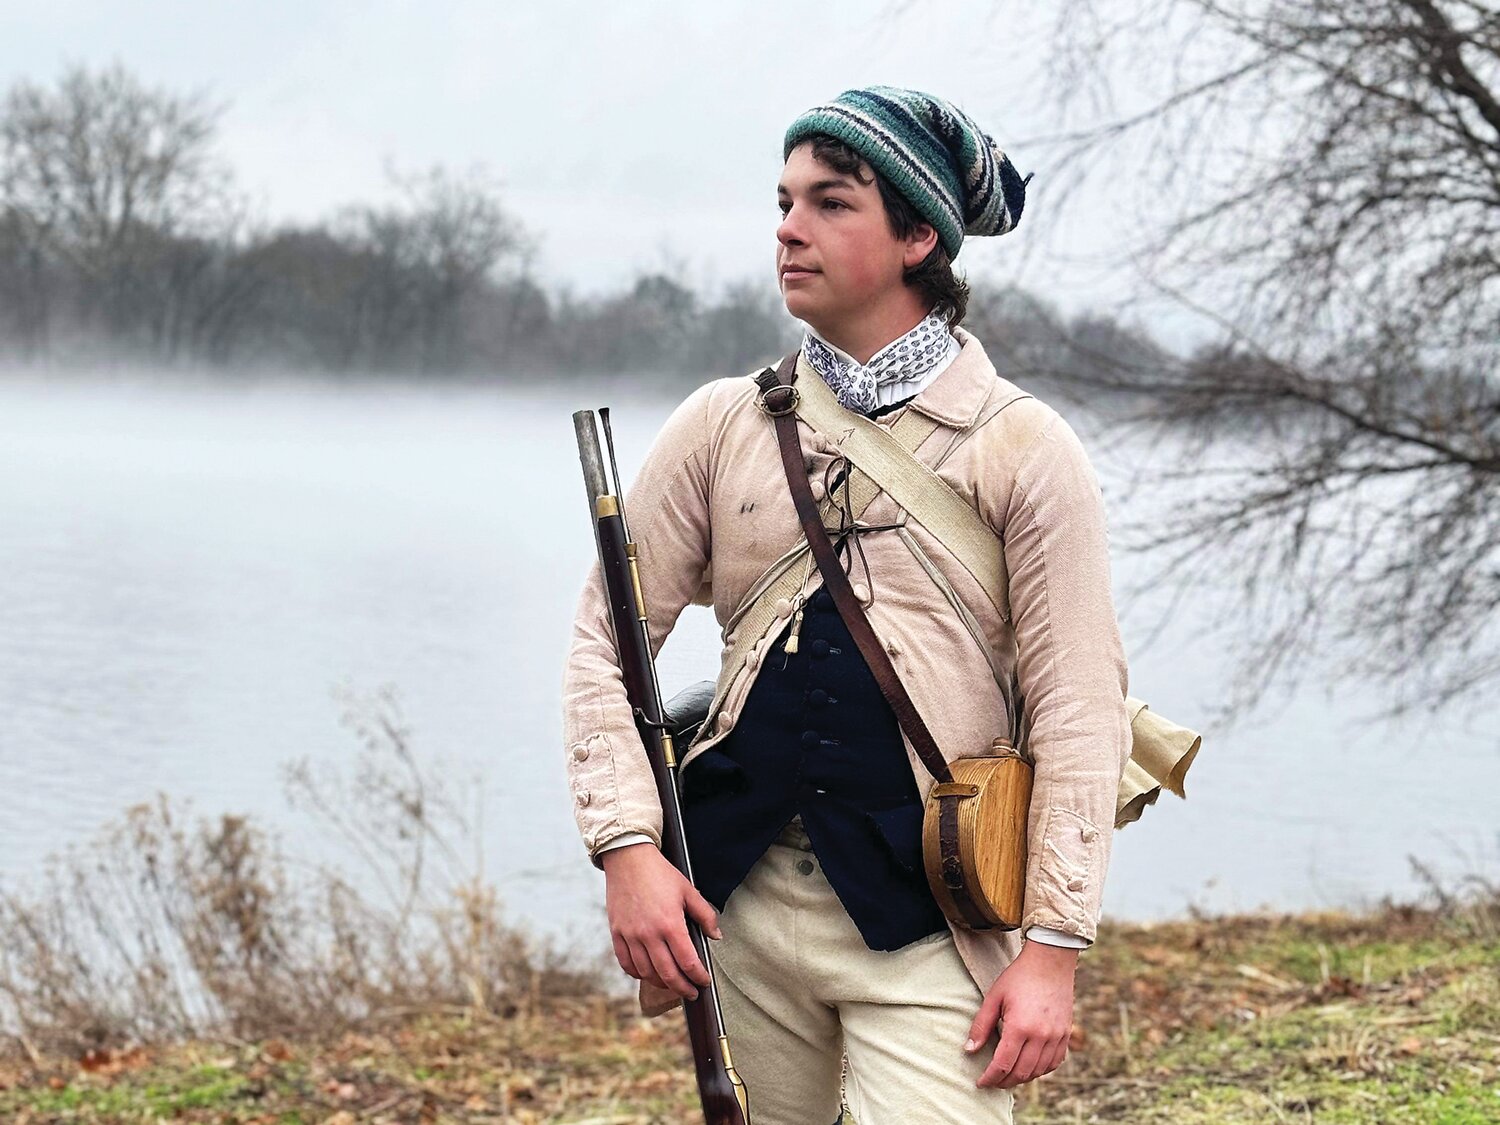 Alex Robb is the Friends of Washington Crossing’s new full-time Interpretive Programs Specialist.